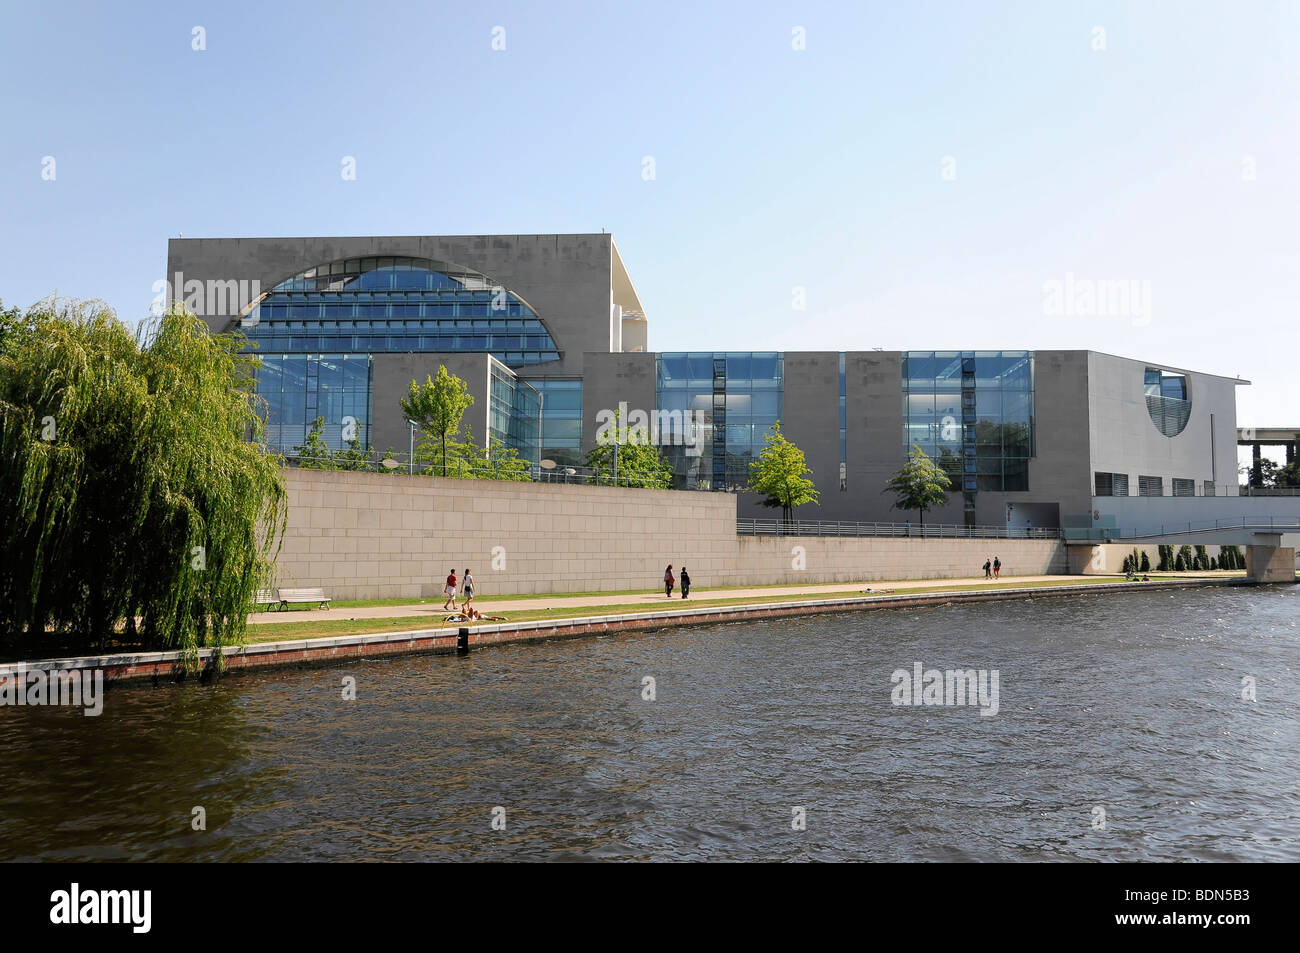 Bundeskanzleramt Federal Chancellery seen from the Spree river side, capital Berlin, Germany, Europe Stock Photo